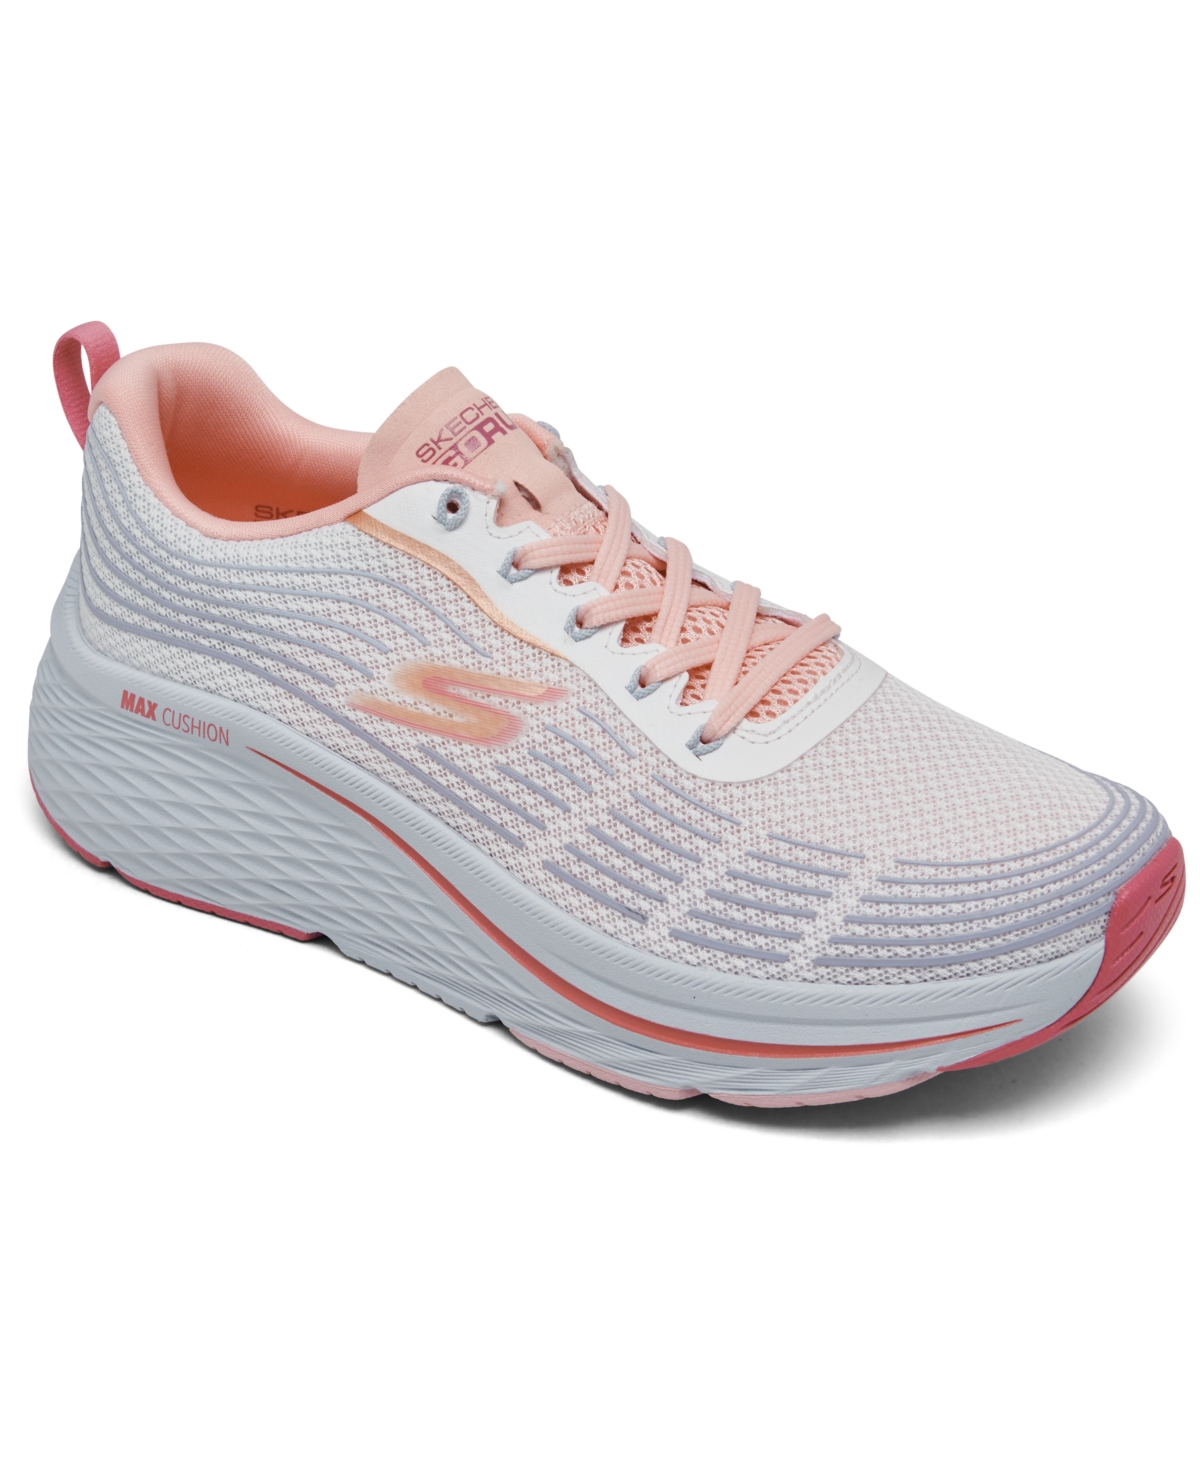 Women's Max Cushioning Elite 2.0 - Alaura Athletic Running Sneakers from Finish Line - White/Pink